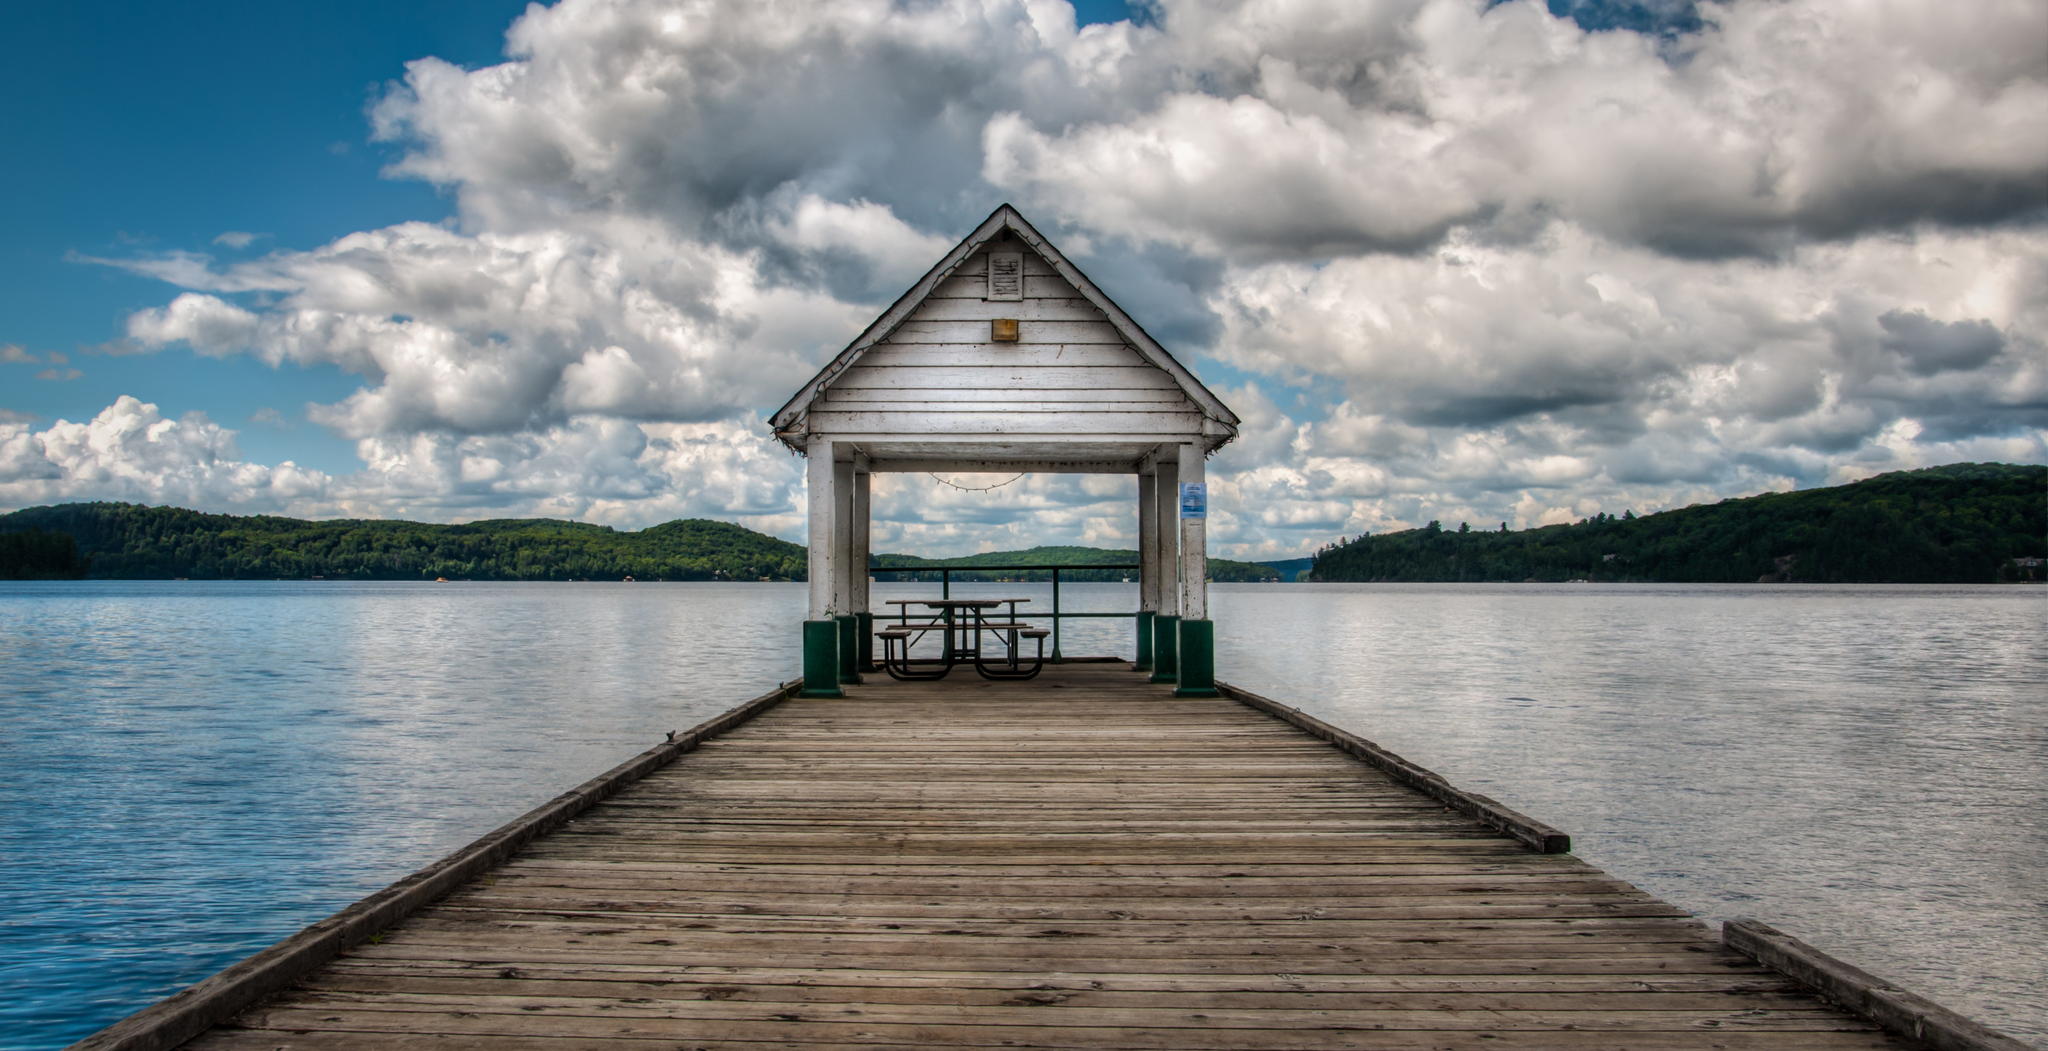 Lake of Bays - The Dock by Jeff Smith